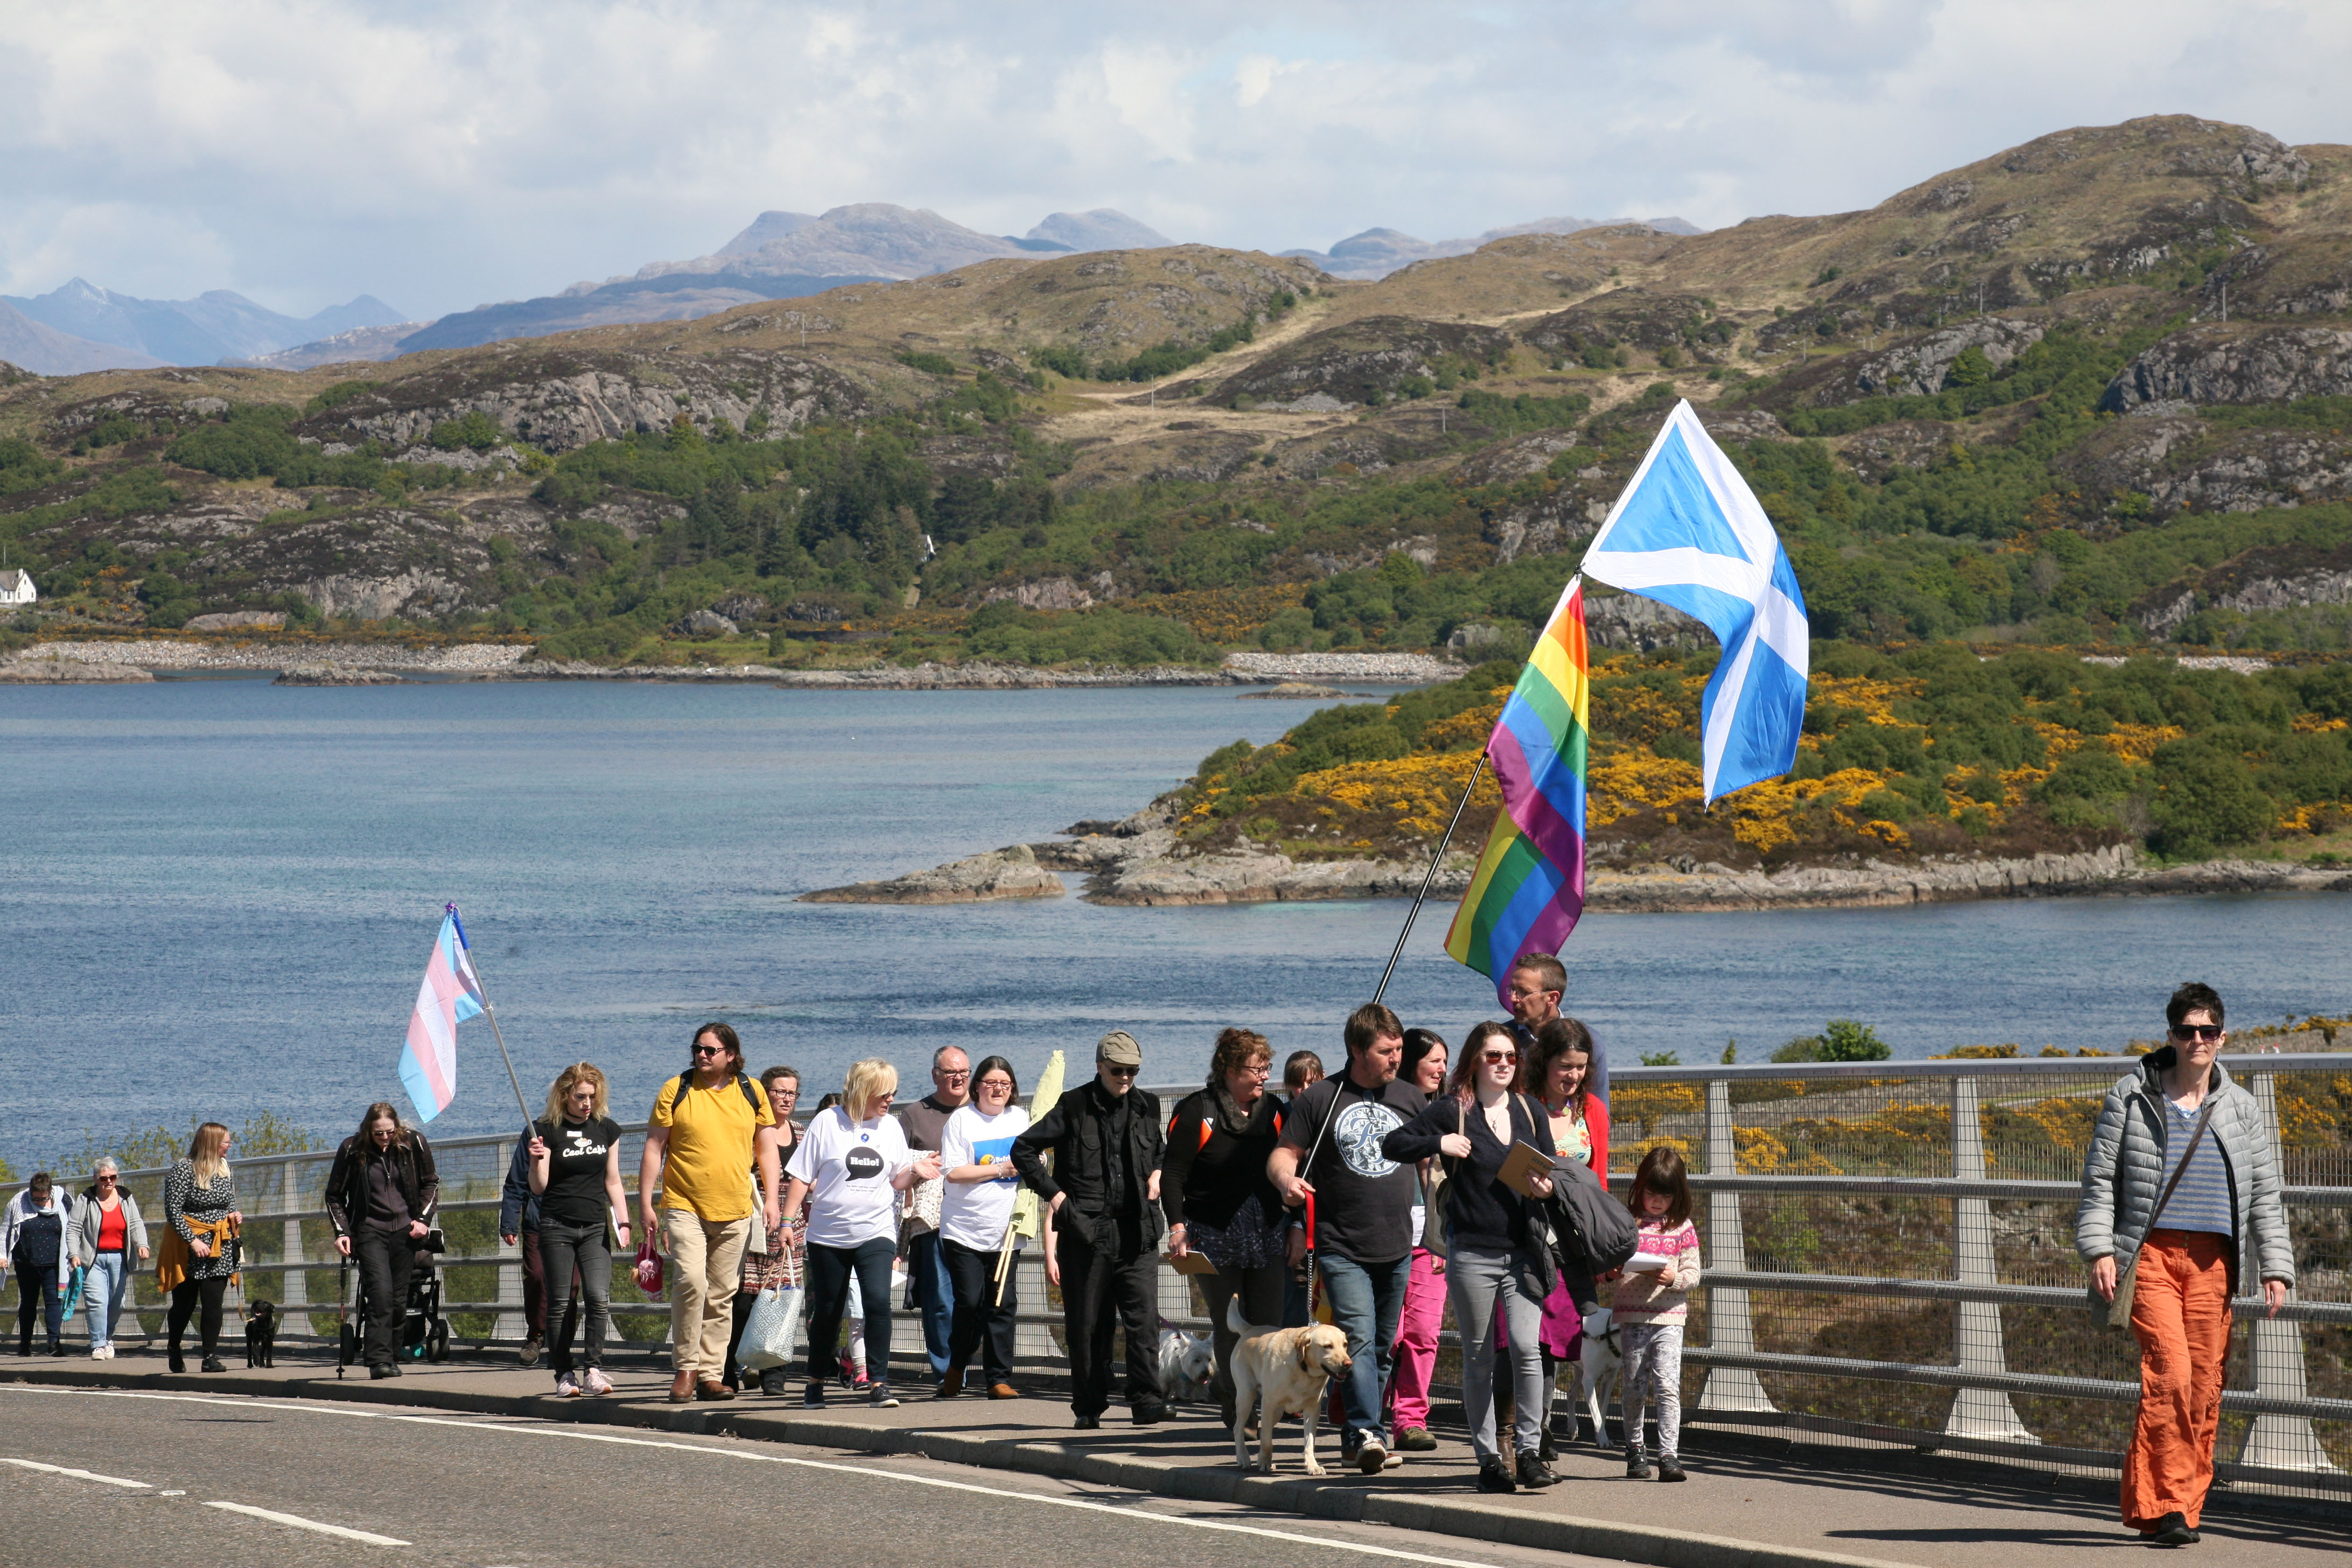 Around 100 people joined in the march on Saturday crossing the Skye Bridge to help raise awareness of Mental Health.